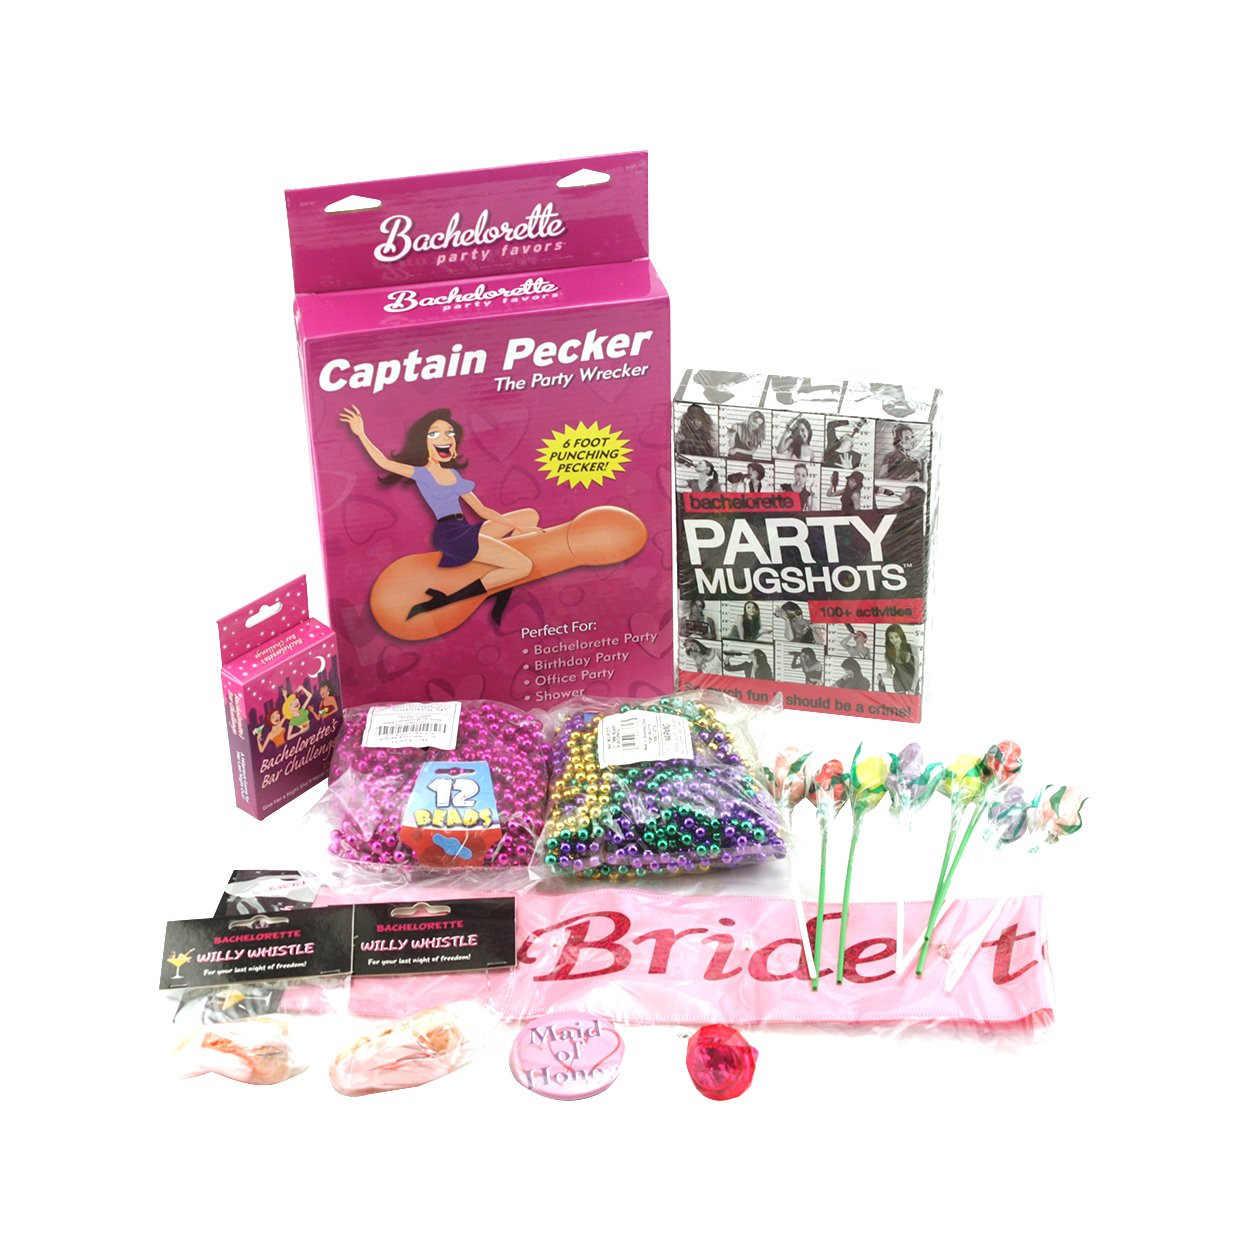 Raunchy Bachelorette Party Ideas
 Naughty Bachelorette Party Games Bachelorette Party Ideas